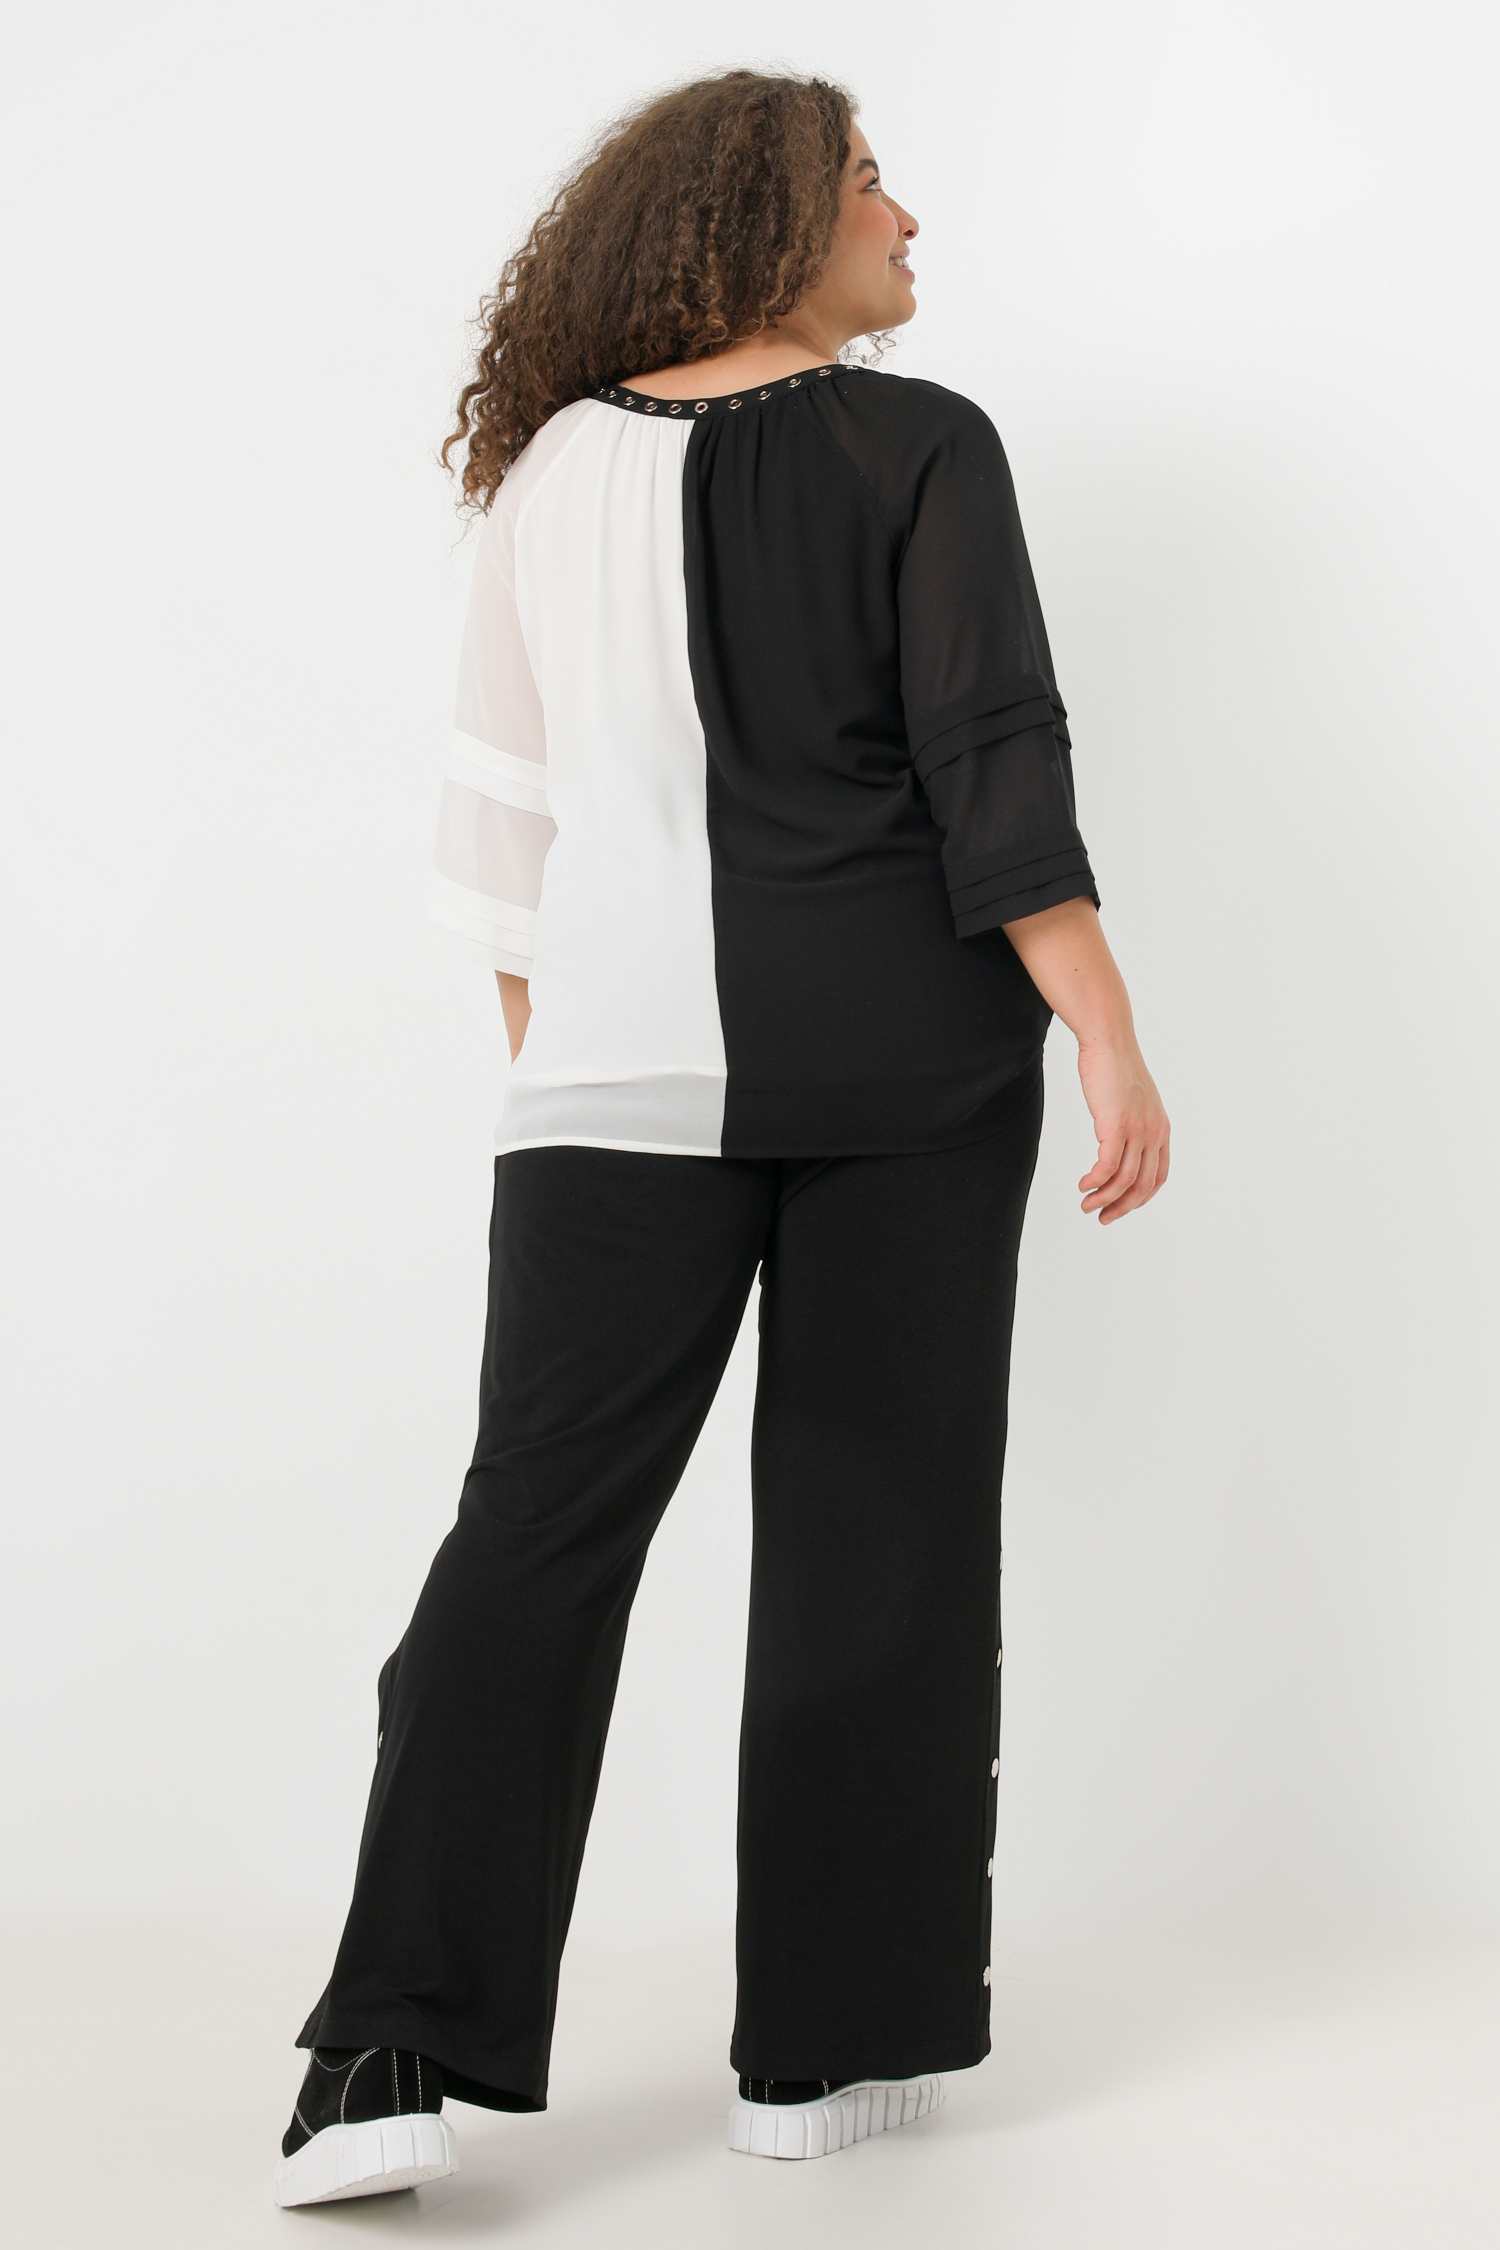 Two-tone black/white voile blouse with eyelets